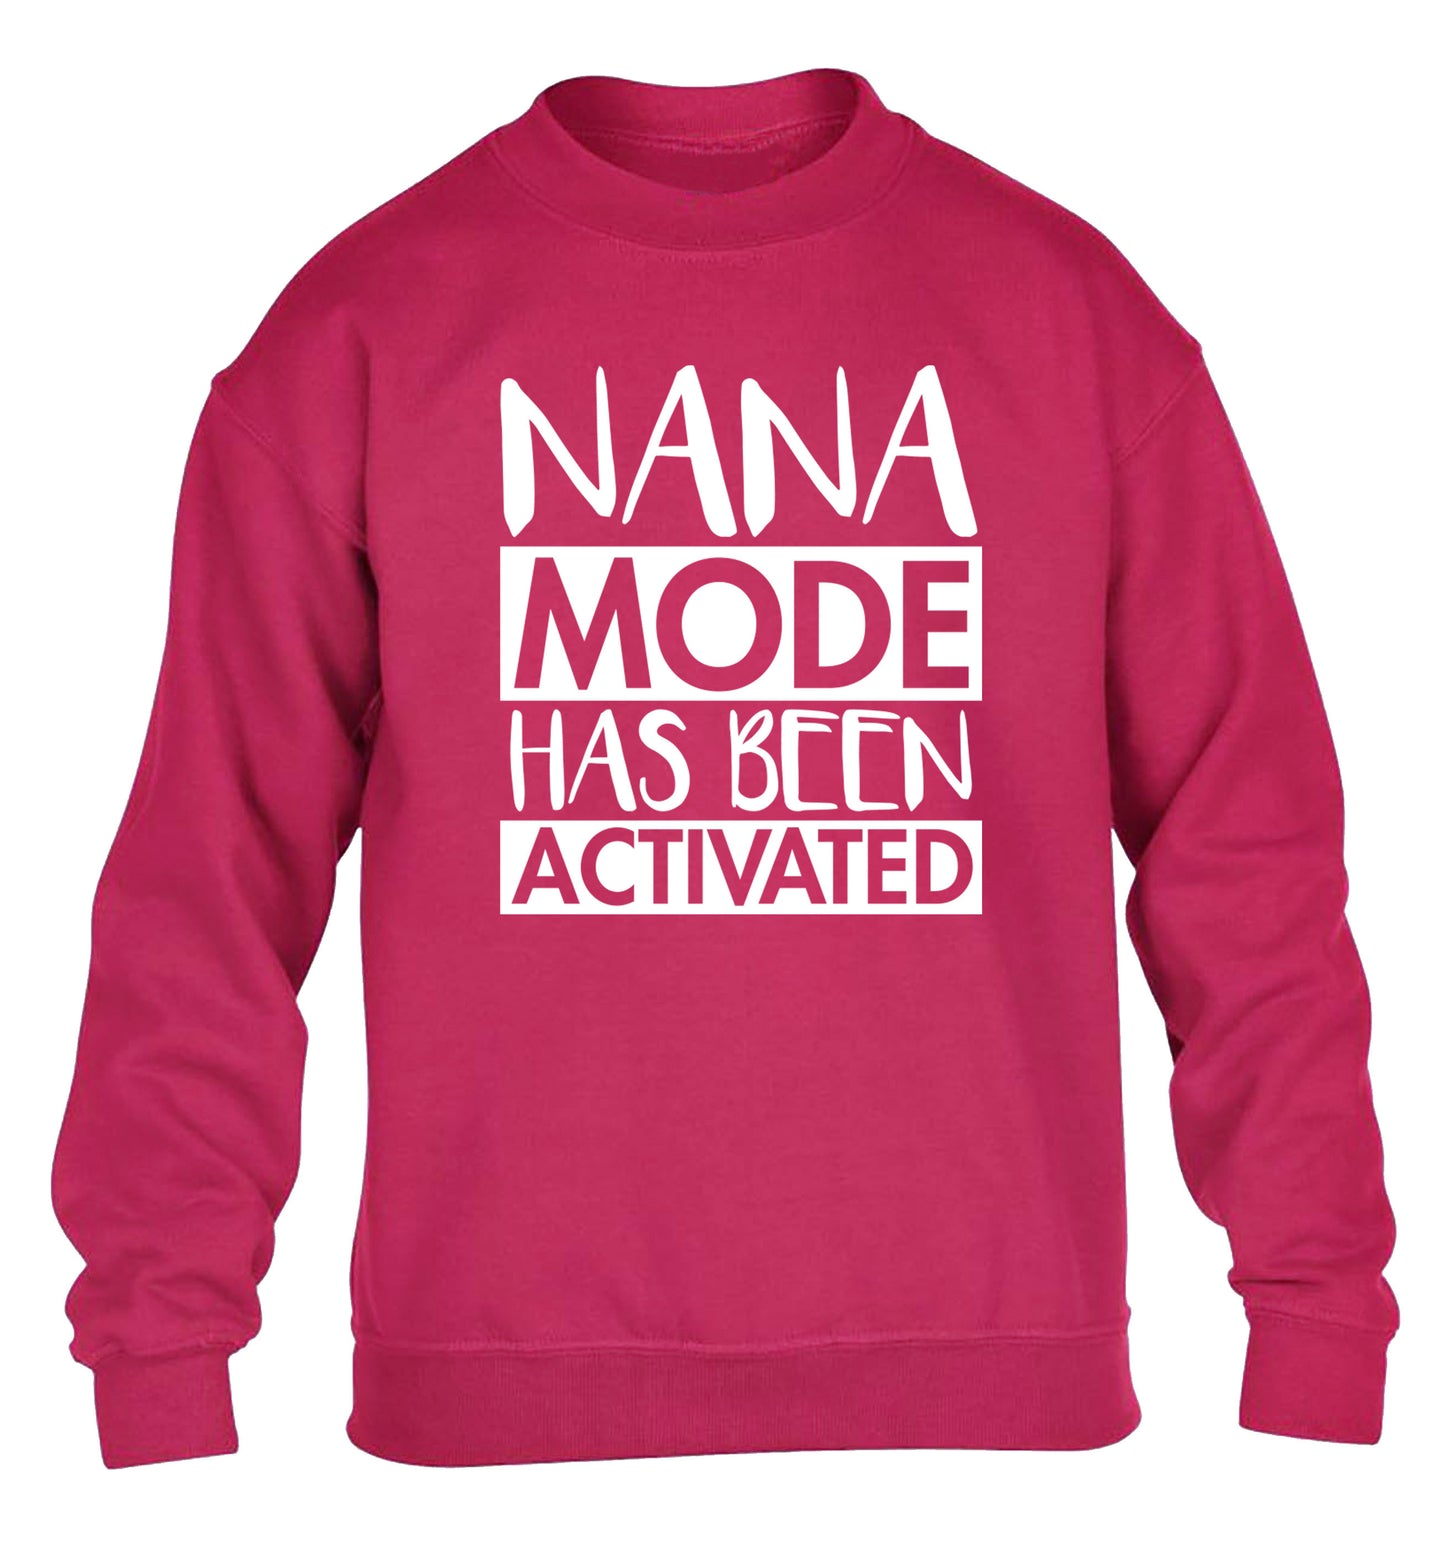 Nana mode activated children's pink sweater 12-14 Years